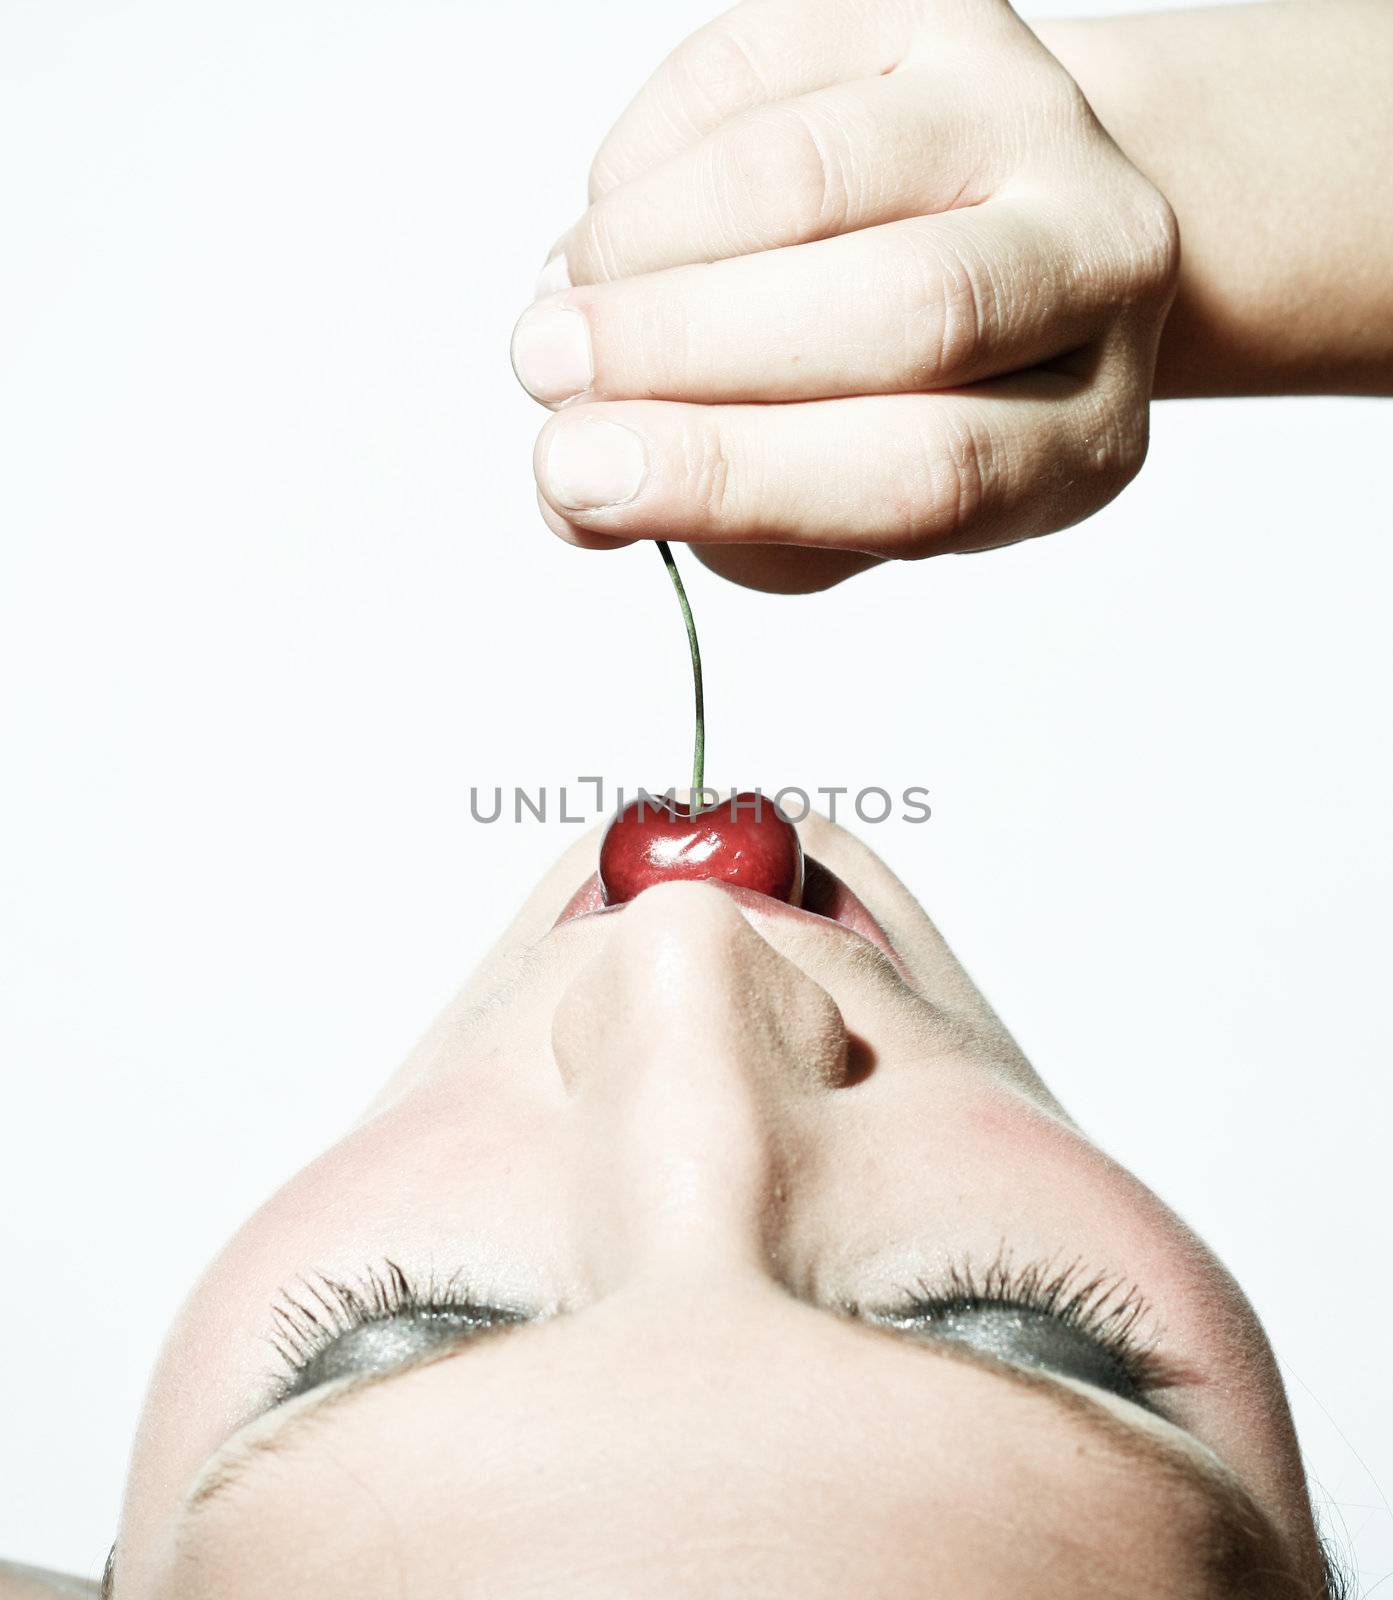 Woman Tasting A Cherry In Contrast by nfx702